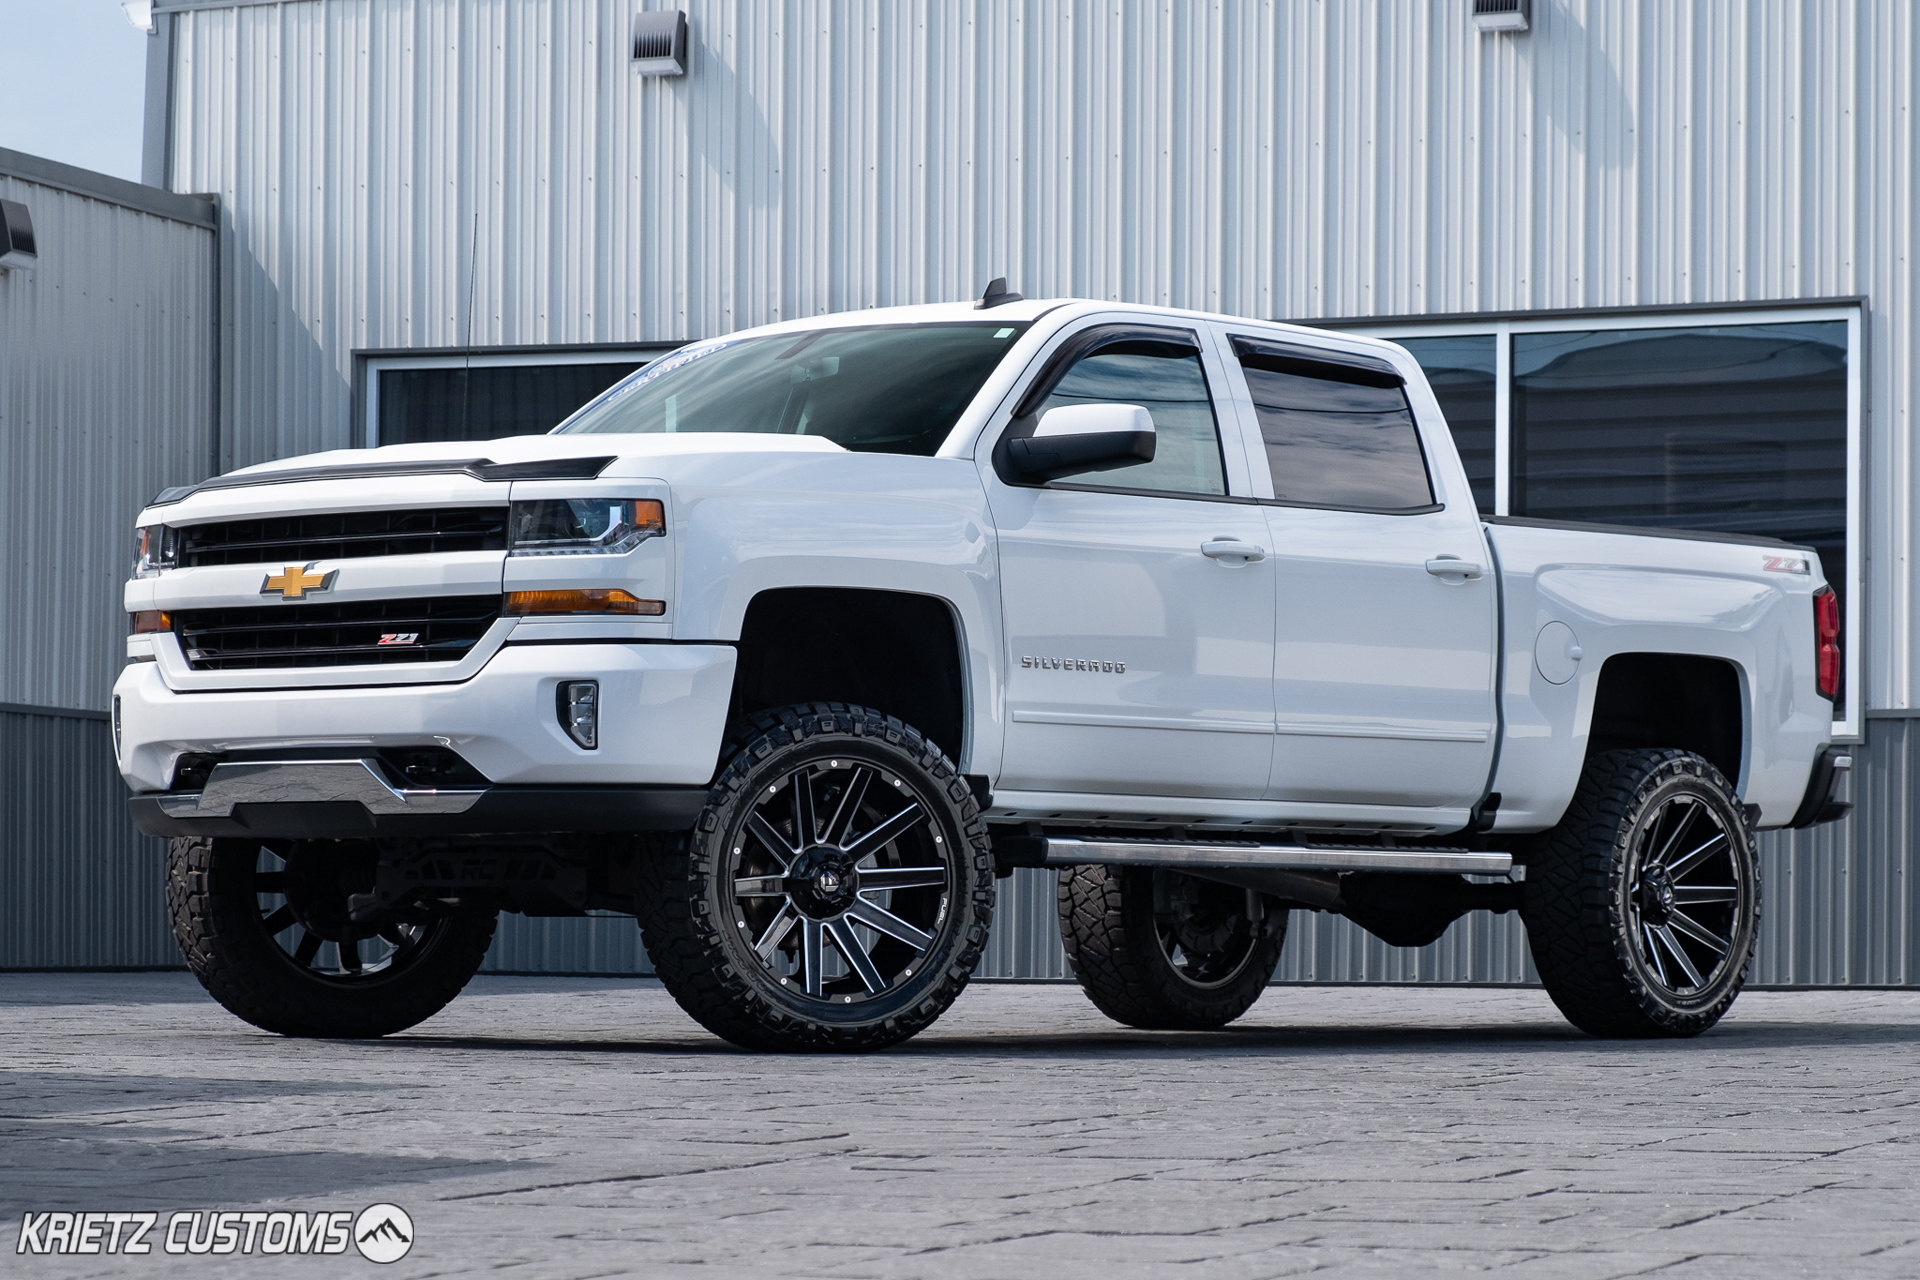 Lifted 2017 Chevrolet Silverado 1500 With 22×10 Fuel Contra Wheels And